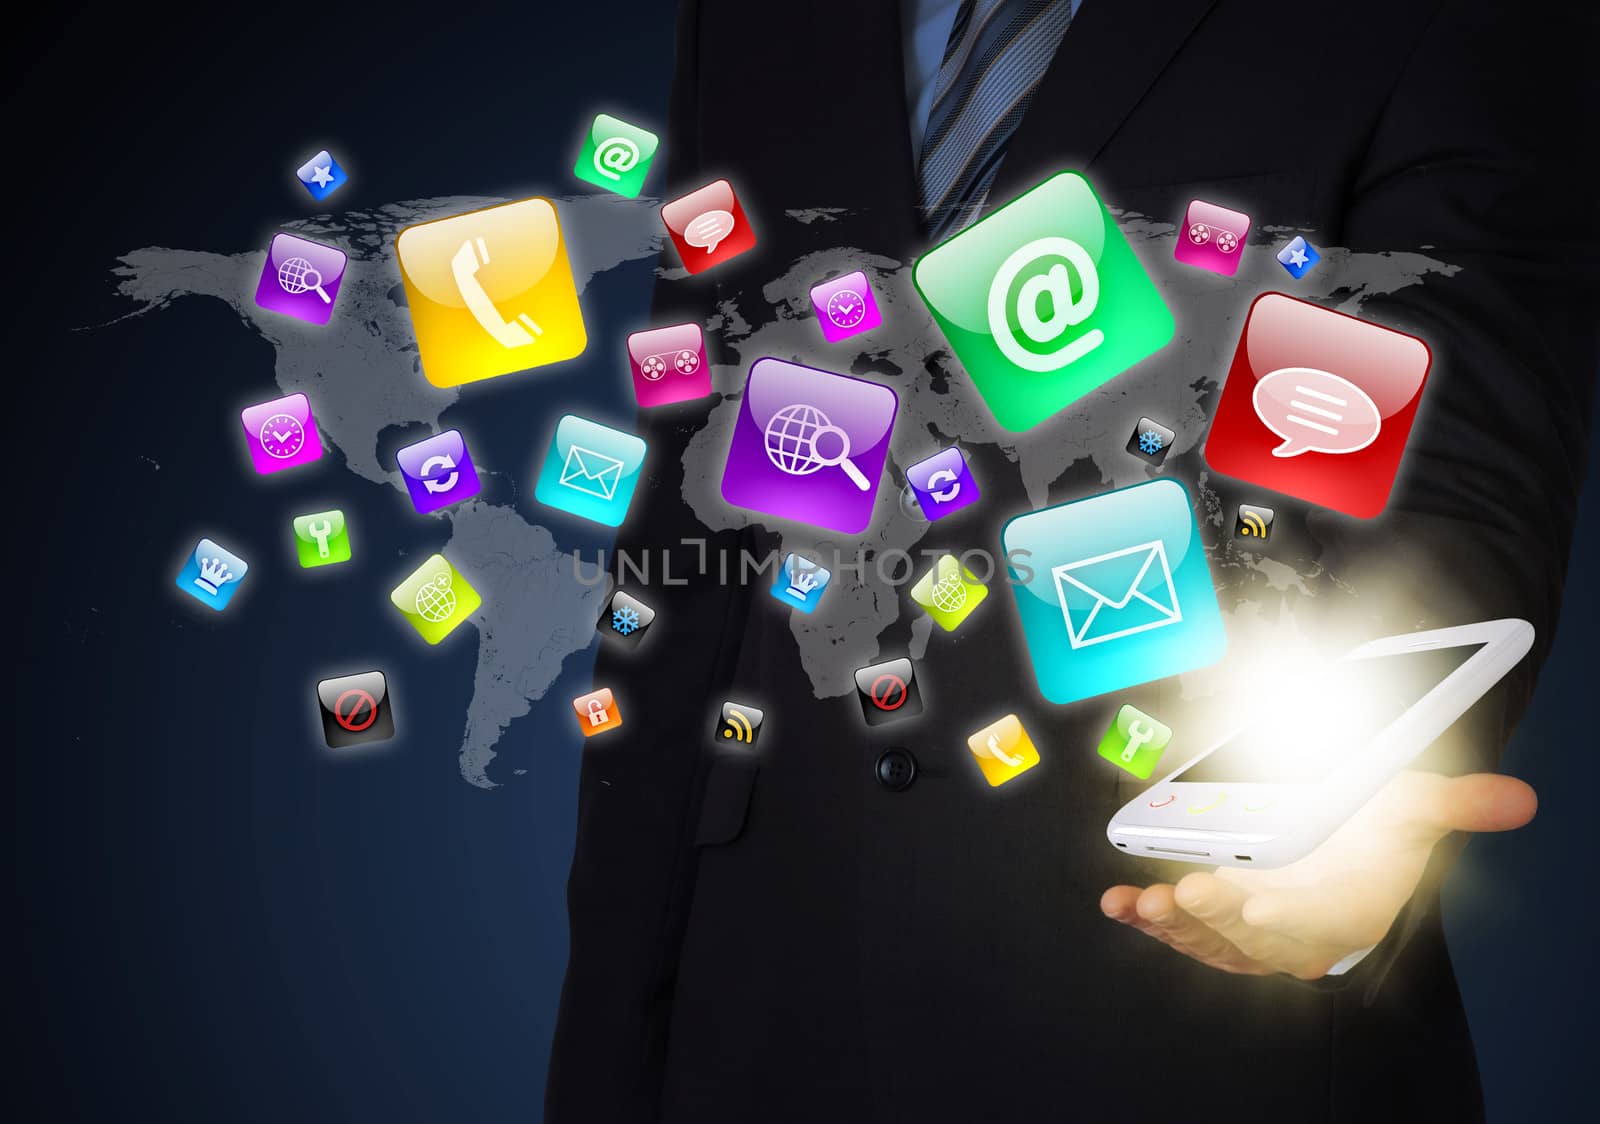 Man in suit holding a smartphone in hand. Application icons around smartphone. The concept of software